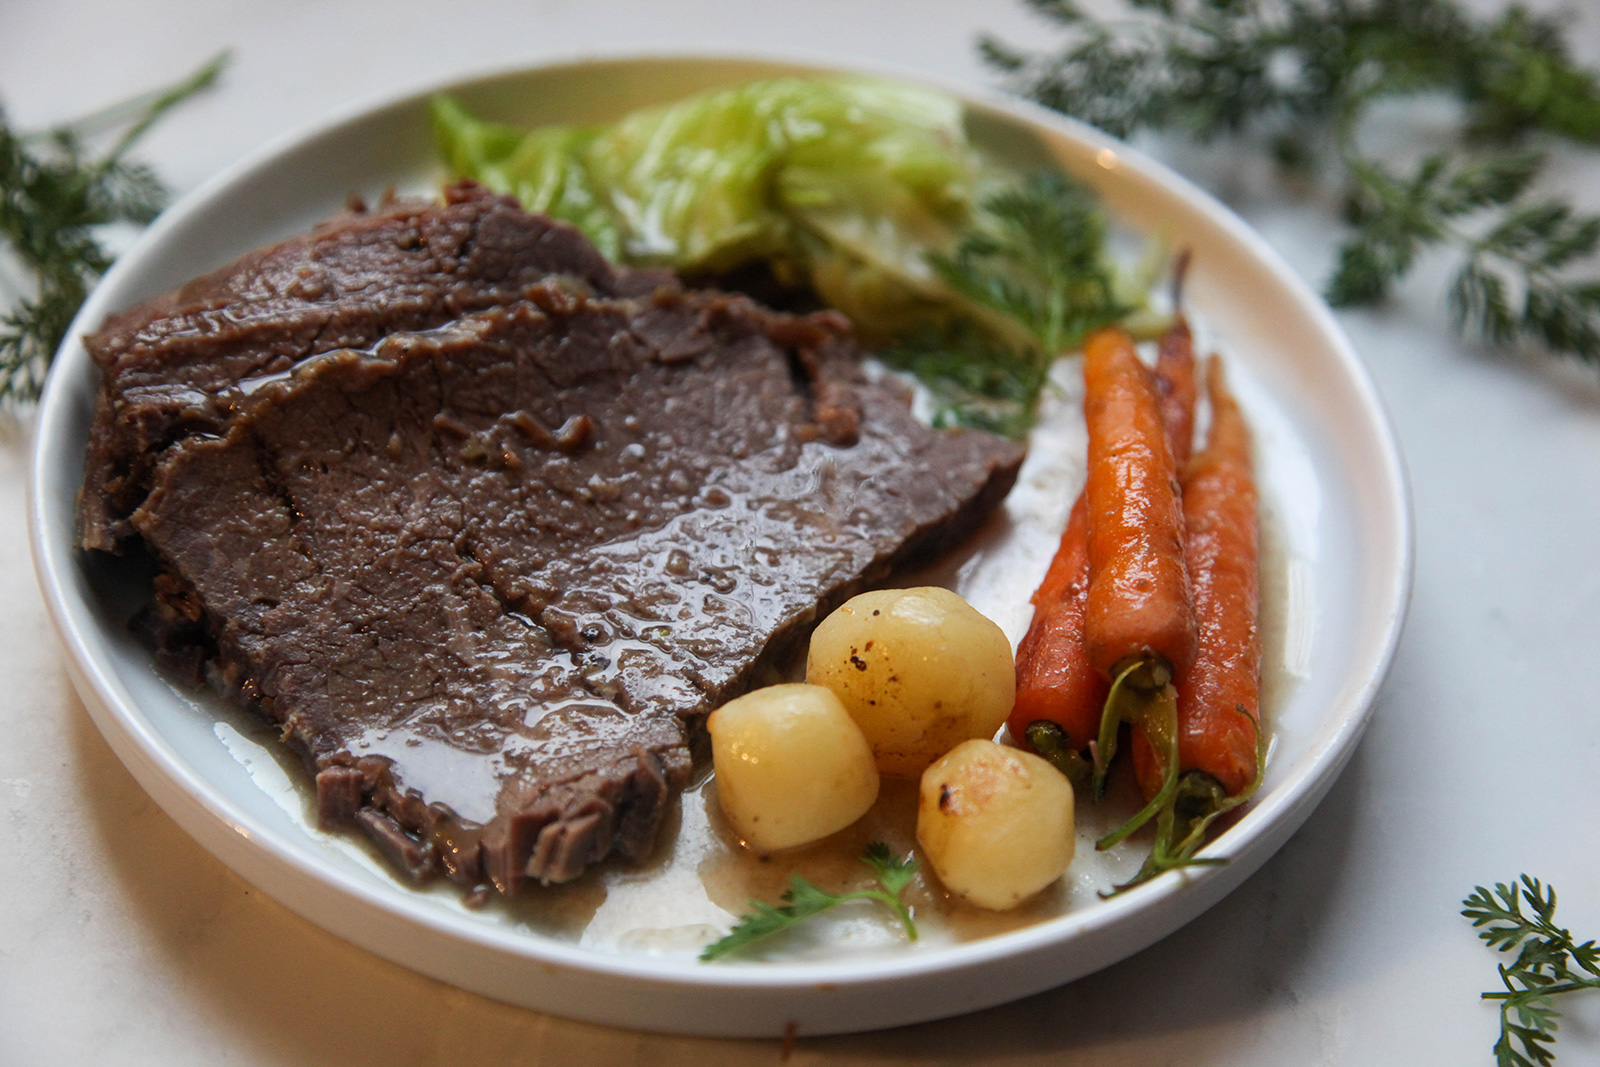 Corned Beef after 3.5 hours of cooking, set on a plate with carrots and potatoes